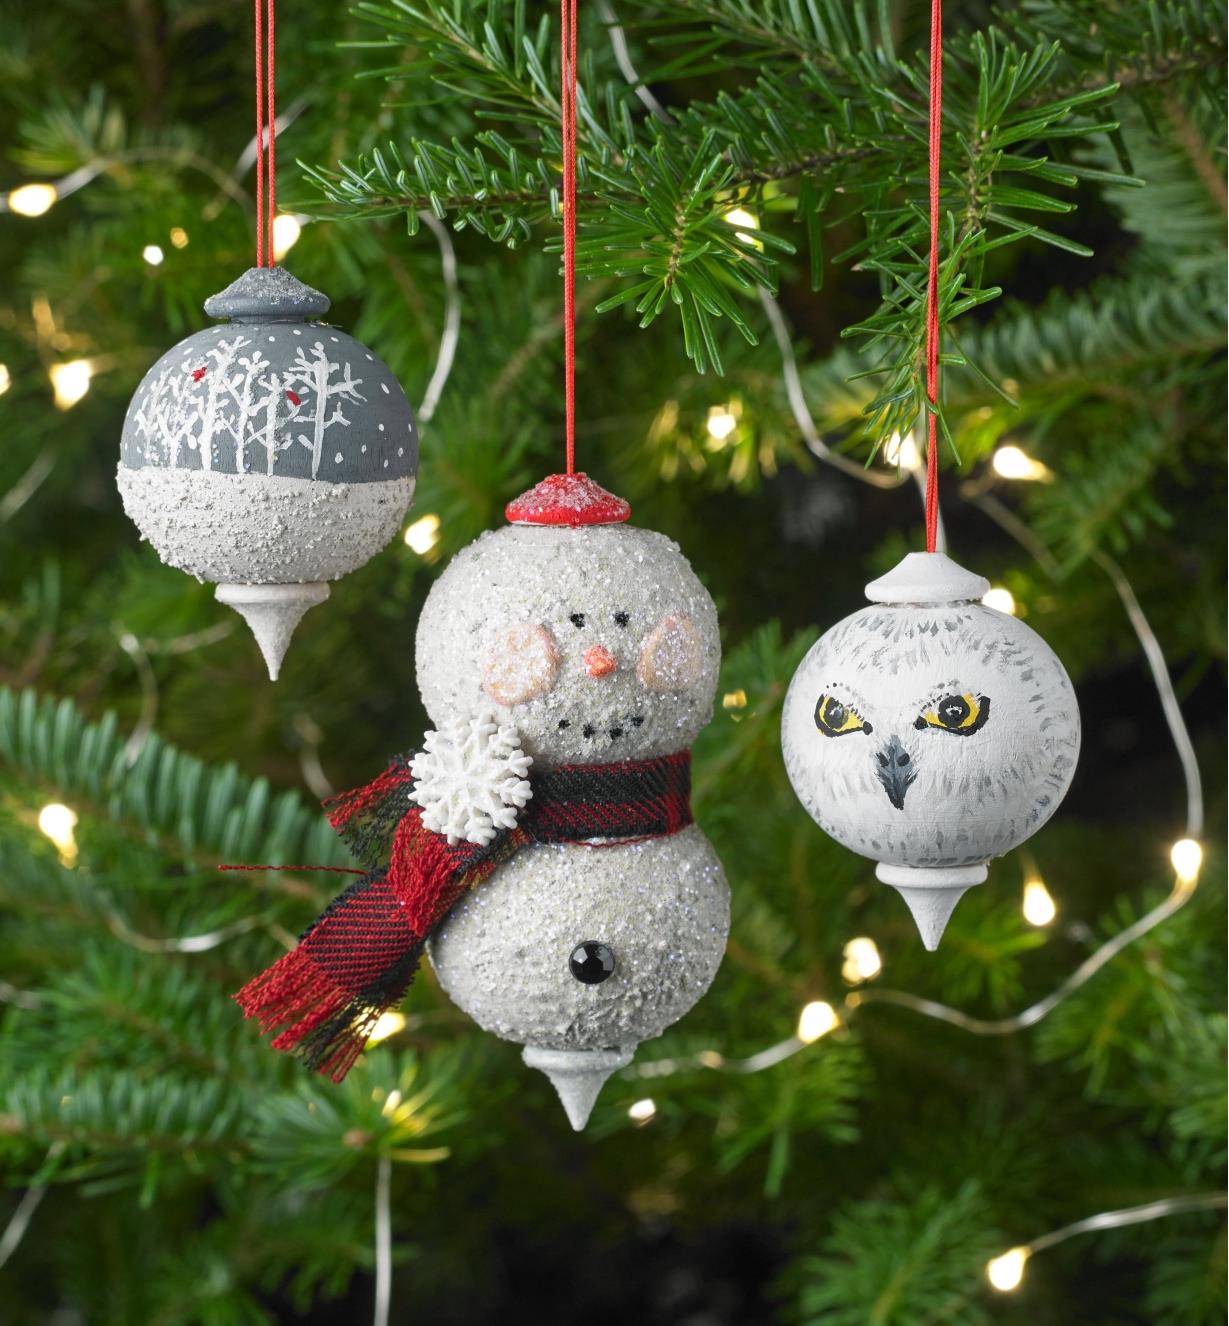 Decorated wooden ornaments hanging on a Christmas tree